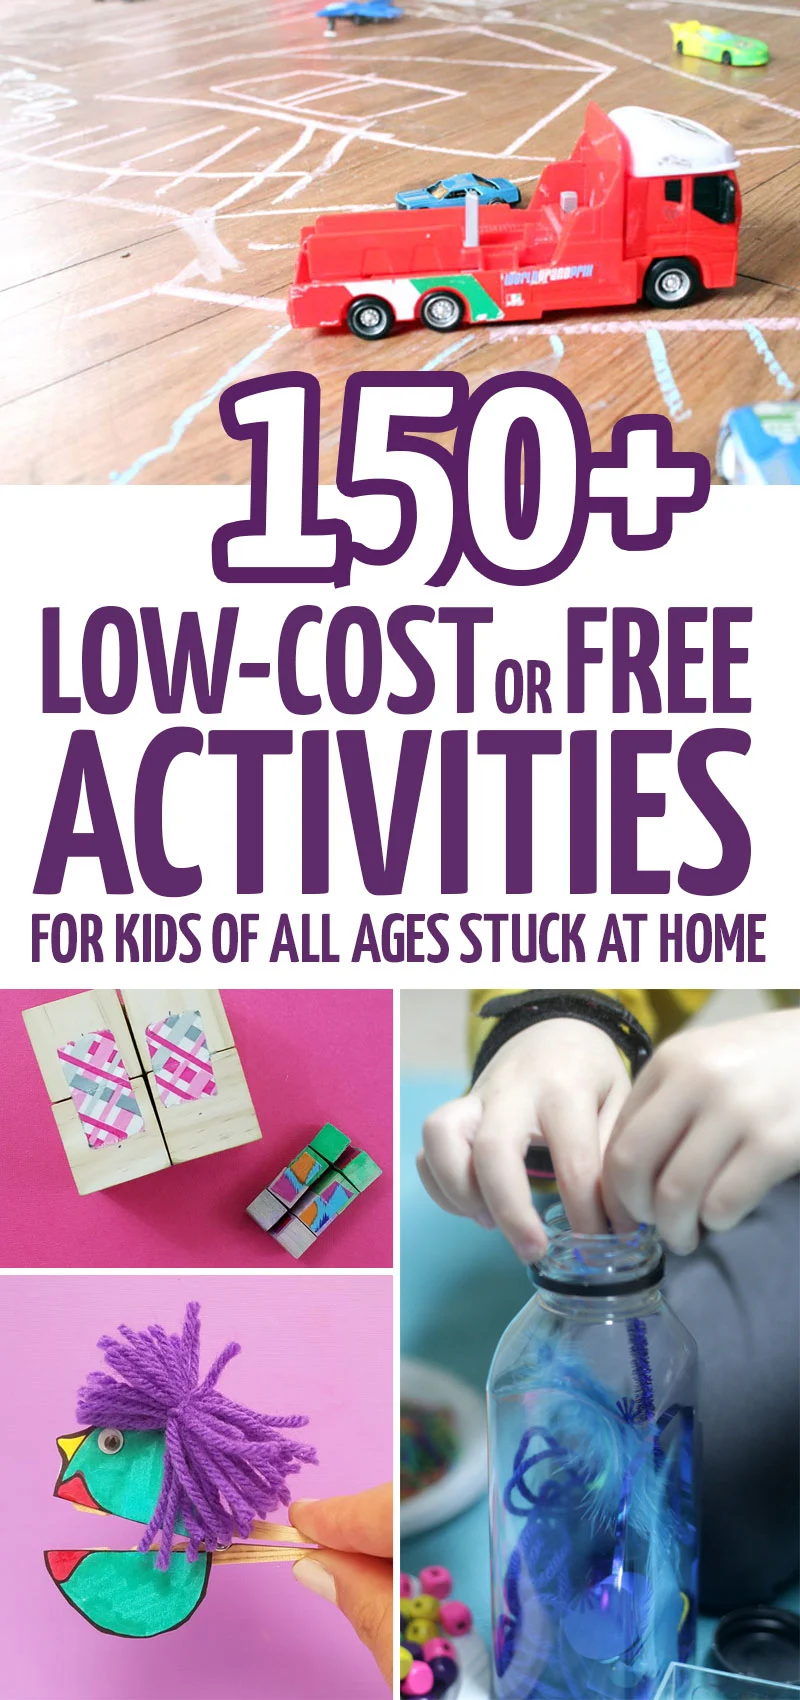 Click for a huge list of free printable activities for kids - with over 150 fun things to do at home with kids of all ages - including ideas for babies, toddlers, preschoolers, grade school, tweens, teens - and even grown-ups!